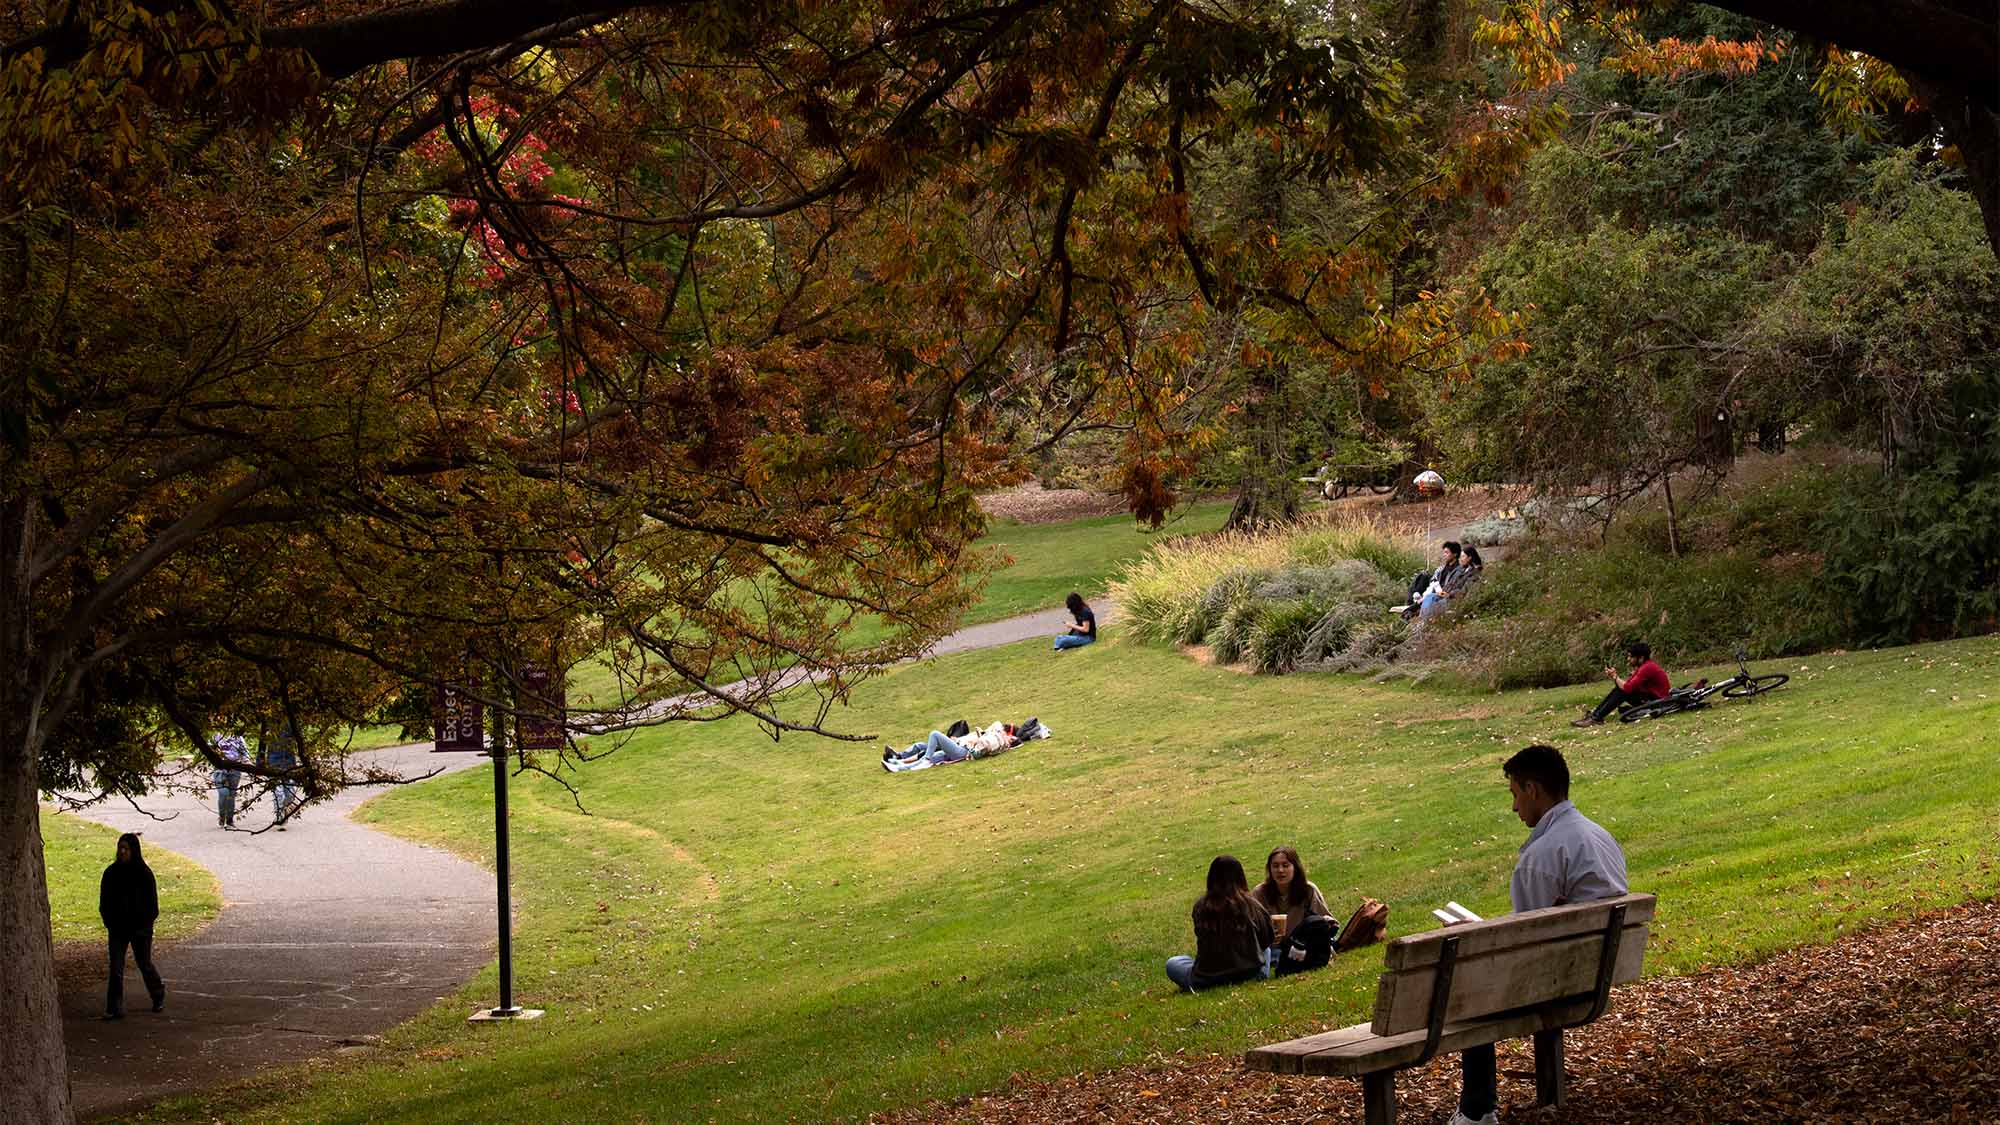 View of people relaxing and studying near Lake Spafford.